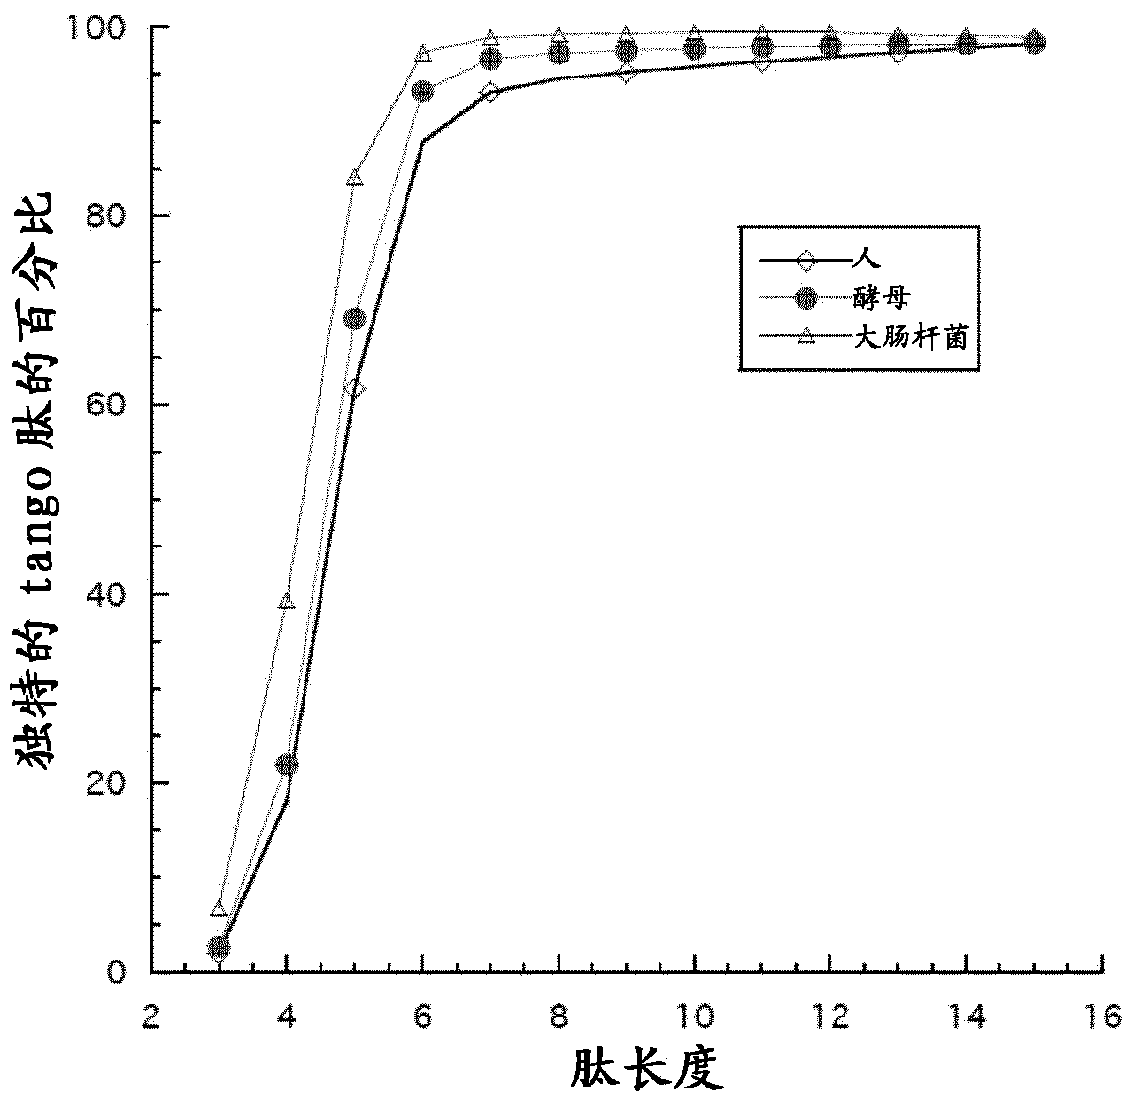 Molecules and methods for inhibition and detection of proteins